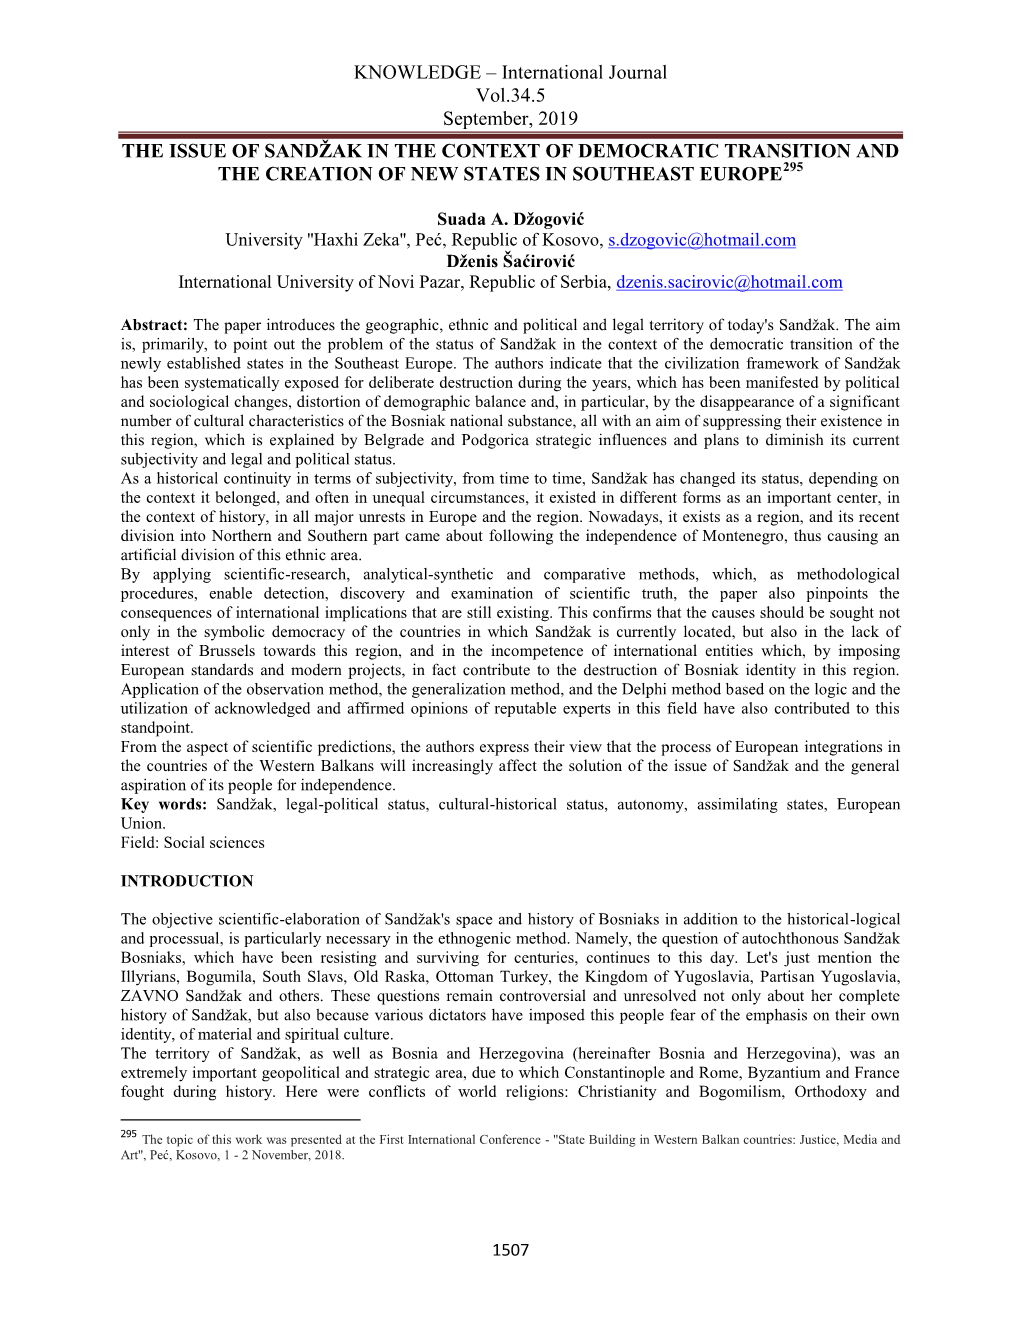 International Journal Vol.34.5 September, 2019 the ISSUE of SANDŽAK in the CONTEXT of DEMOCRATIC TRANSITION and 295 the CREATION of NEW STATES in SOUTHEAST EUROPE